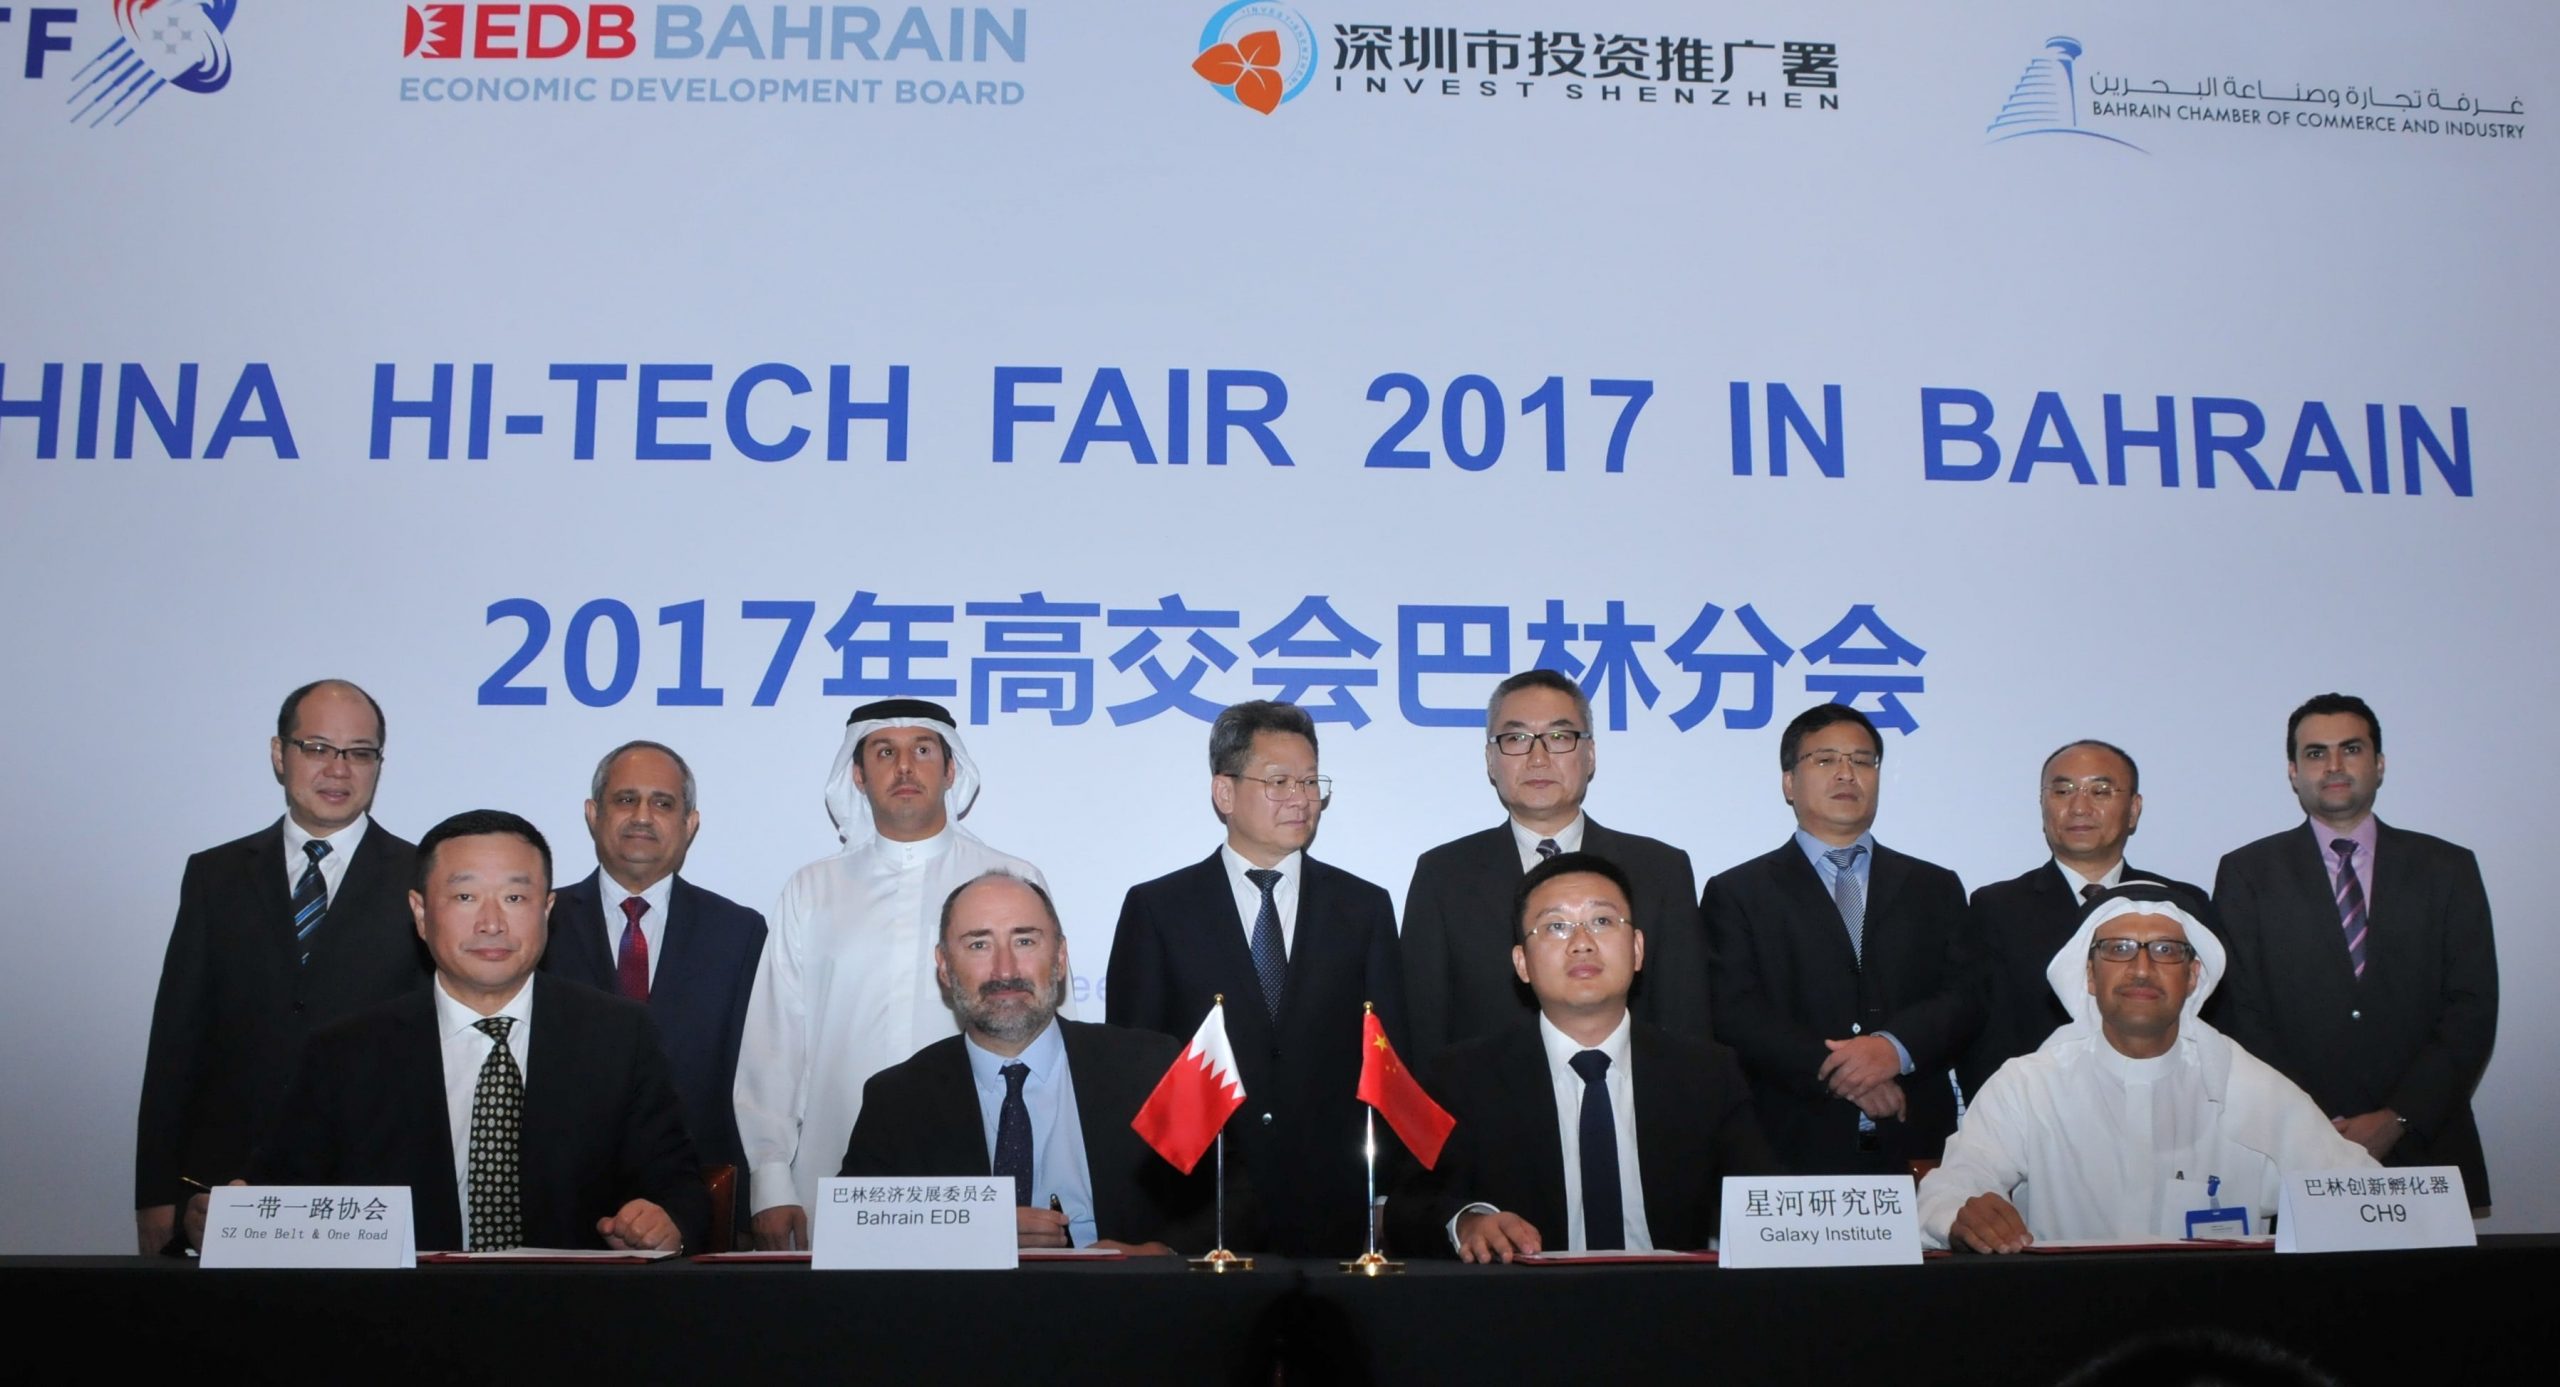 Bahrain EDB signs three agreements to promote stronger economic ties with China